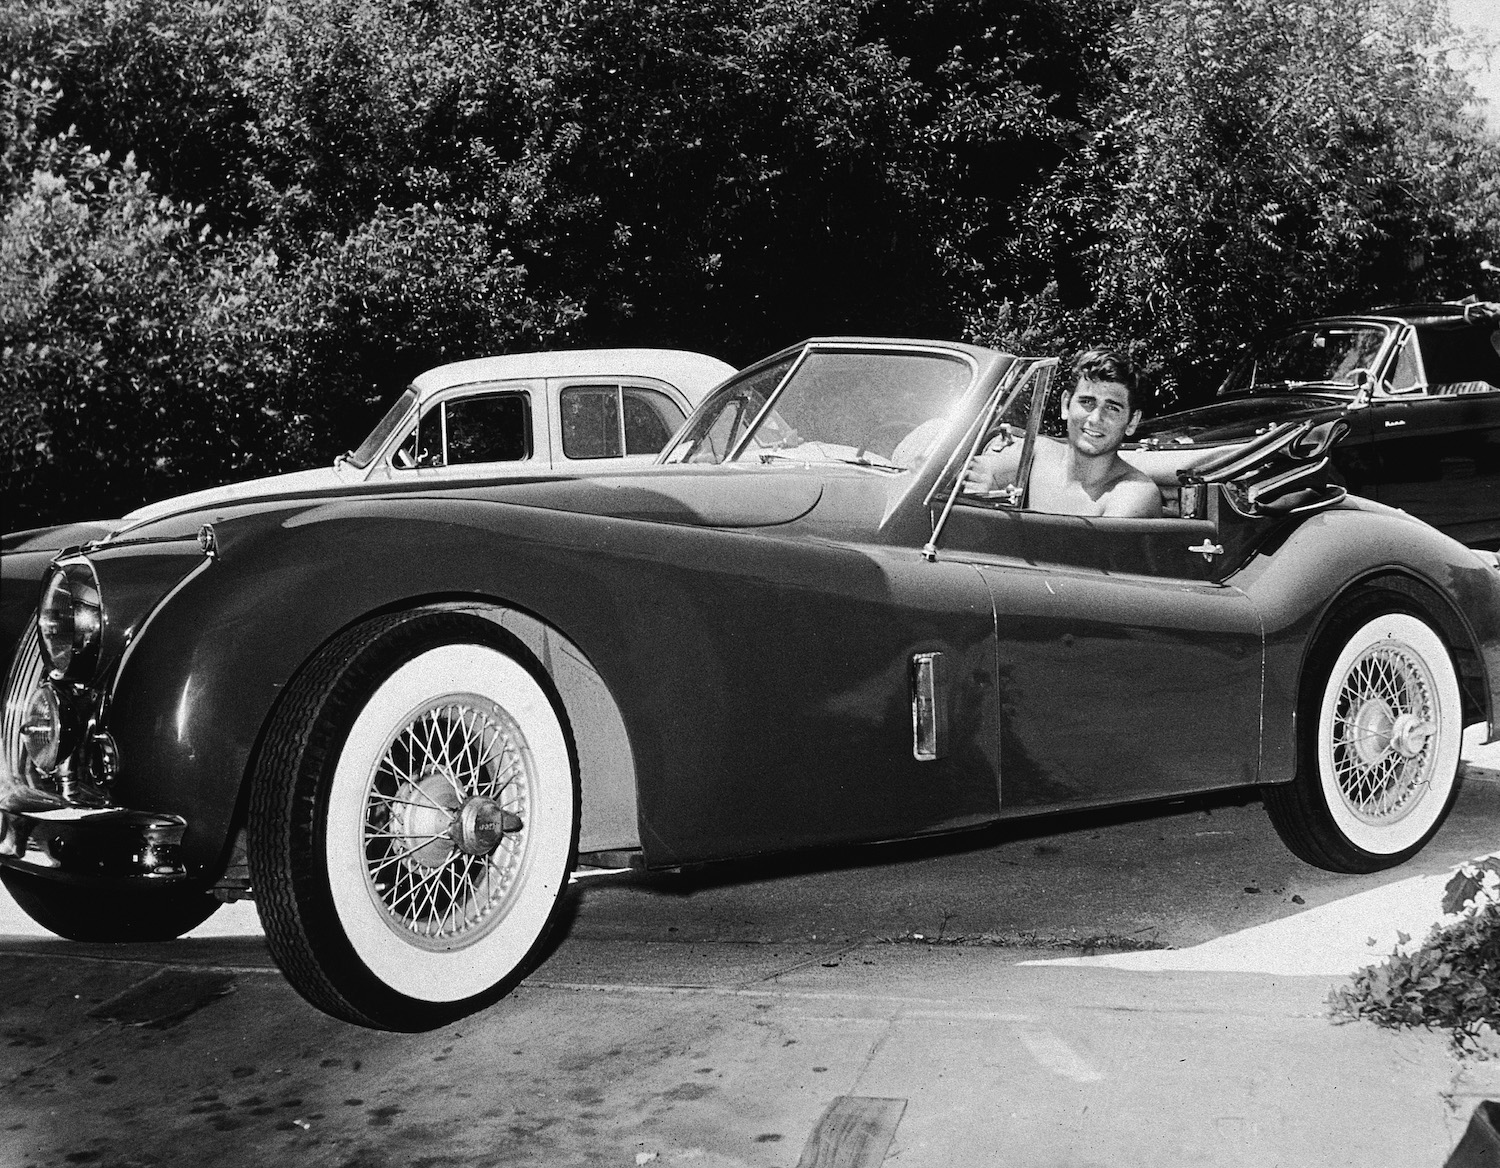 Actor Michael Landon shirtless in his Jaguar XK140. Traffic laws do not dictate drivers' outfits. Traffic laws do not dictate drivers' outfits. Penal laws do. Driving shirtless is not illegal wherever being shirtless in public is legal. Drivers are not exempt from public decency and indecent exposure laws.| Hulton Archive/Getty Images